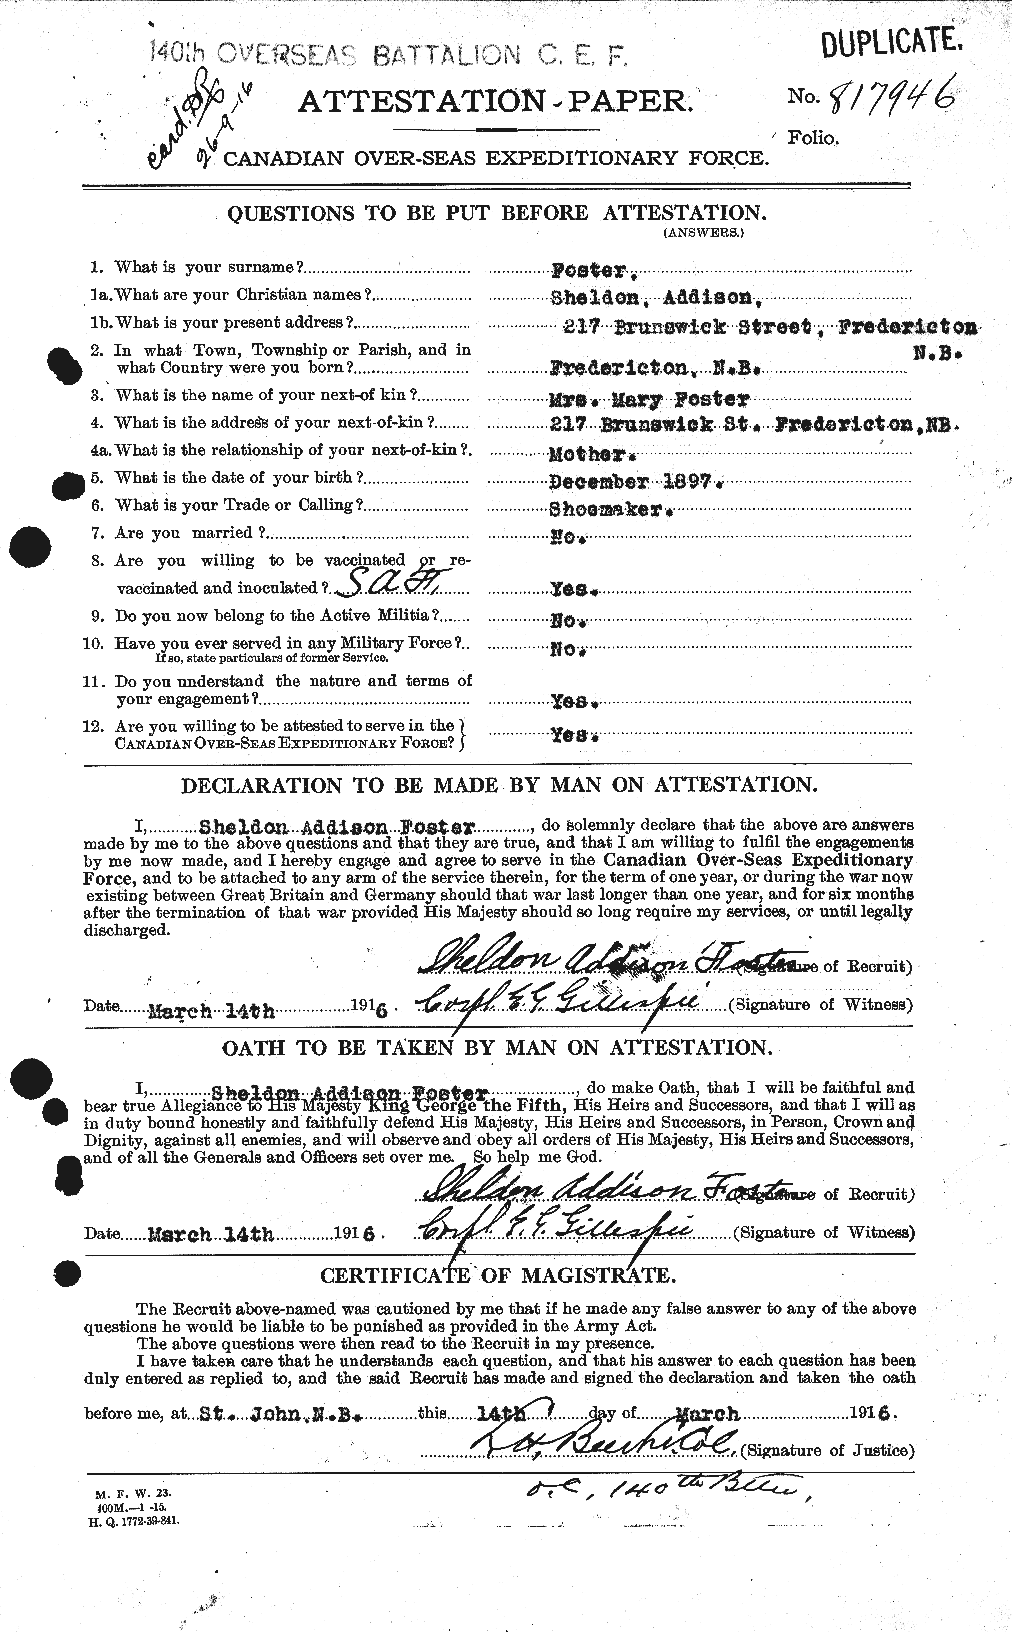 Personnel Records of the First World War - CEF 335207a